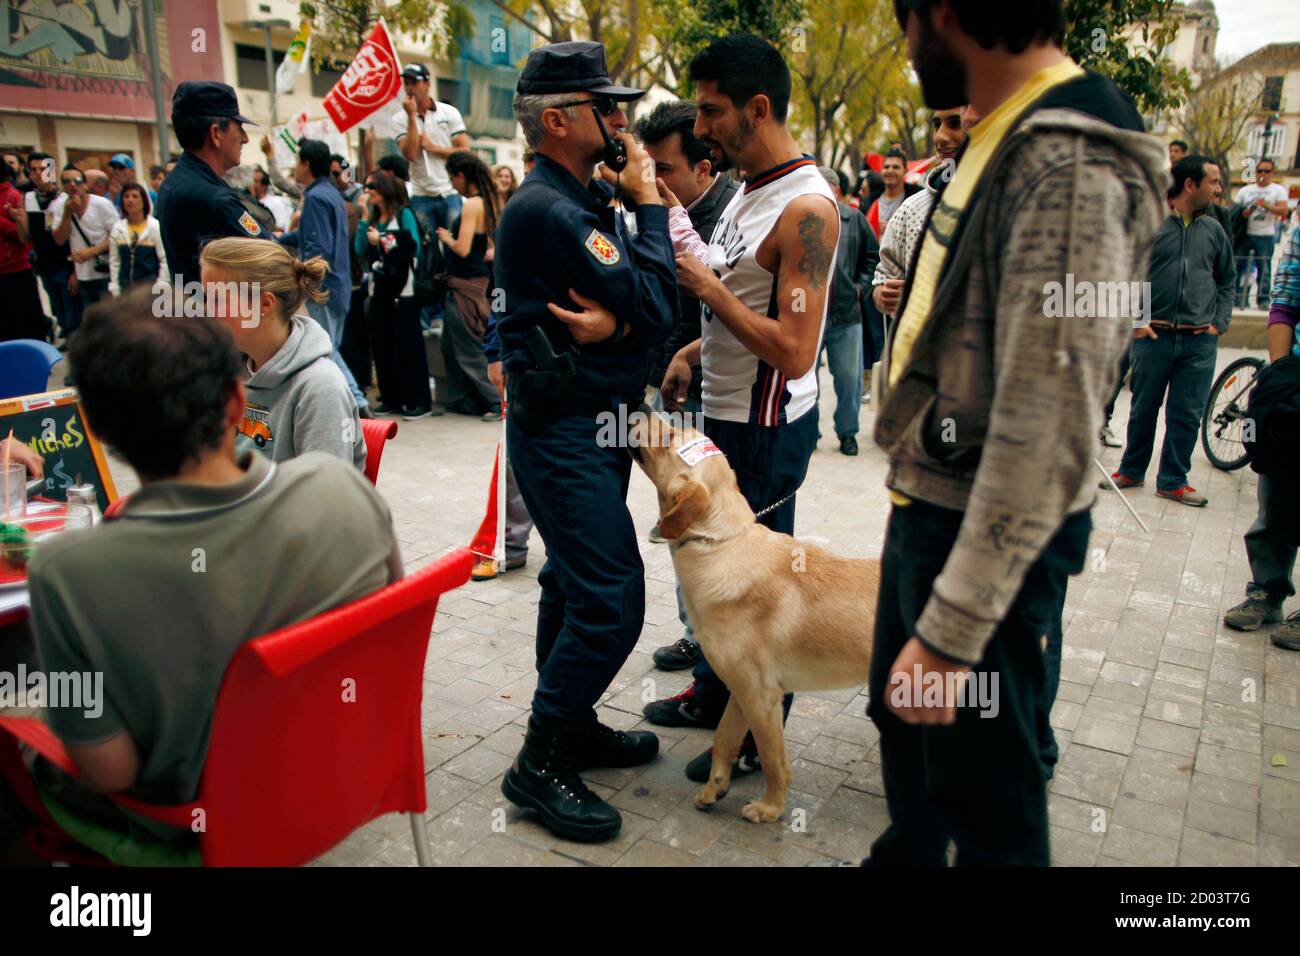 A dog smells a riot police officer as he talks with a union picketer during  a nationwide general strike in Malaga, southern Spain March 29, 2012.  Spanish workers staged a general strike